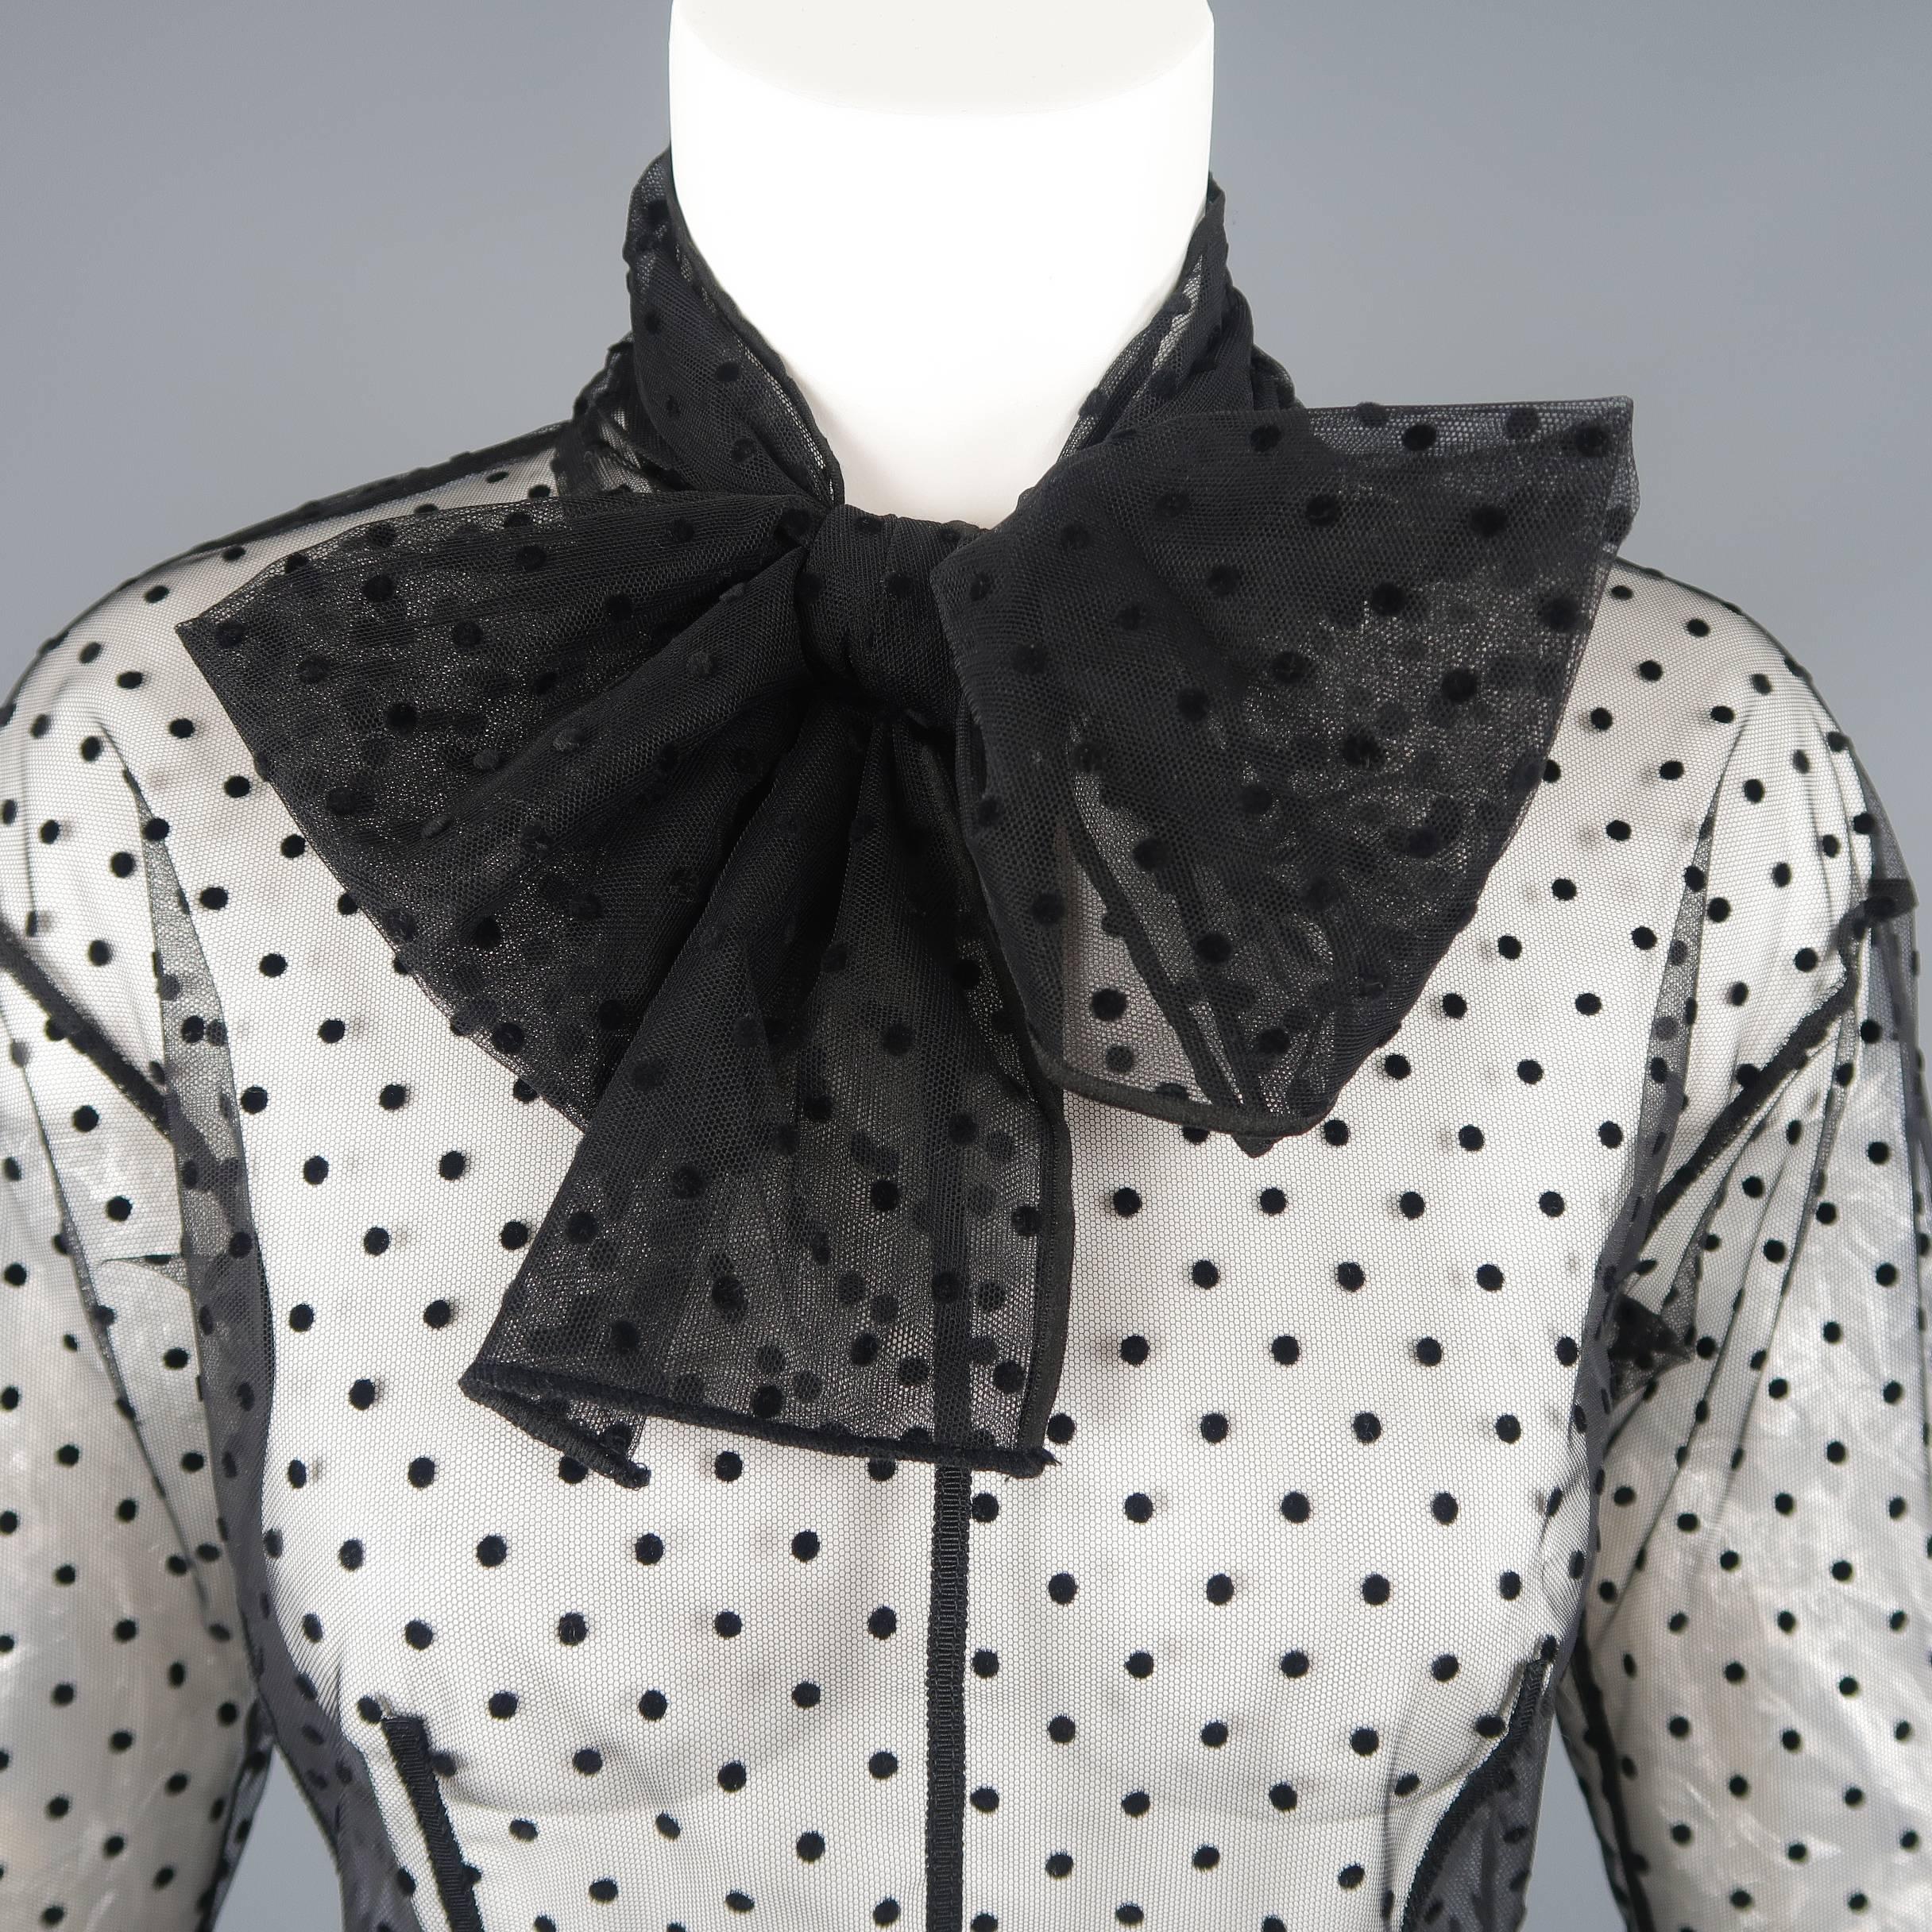 Marc Jacobs blouse comes in silk polka dot tulle mesh with grosgrain piping, hidden back zipper, and oversized bow collar. Made in Italy.
 
Good Pre-Owned Condition.
Marked: 0
 
Measurements:
 
Shoulder: 18 in.
Bust: 32 in.
Sleeve: 23 in.
Length: 20